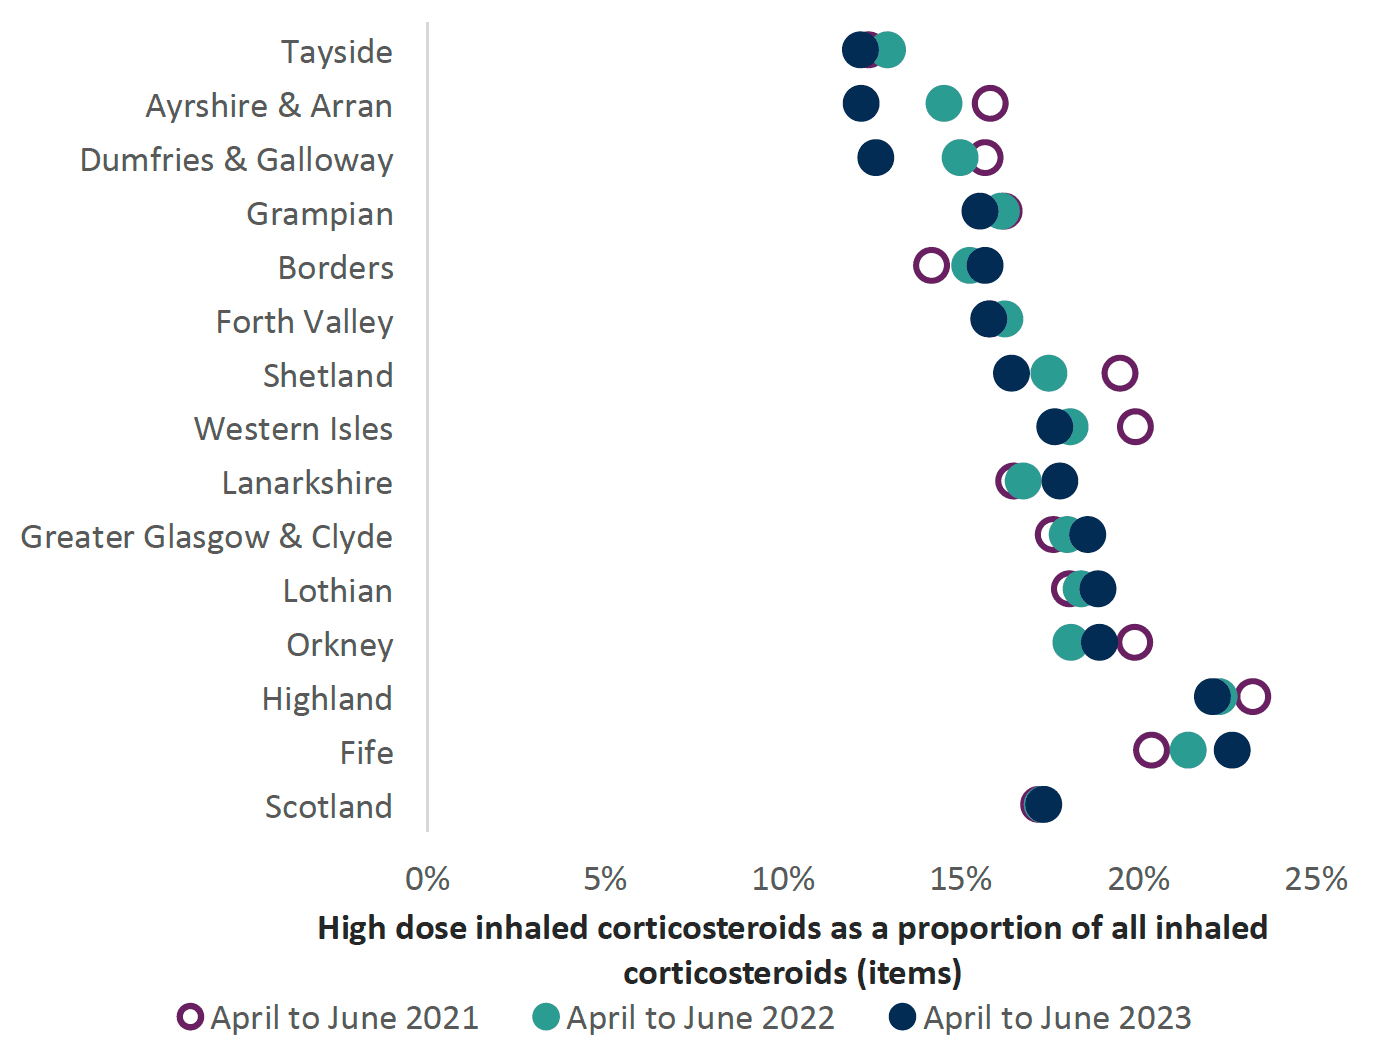 Chart comparing high dose corticosteroid inhalers as a percentage of all corticosteroid inhaler items between health boards and Scotland in 2021, 2022 and 2023. Overall Scotland trend is increasing